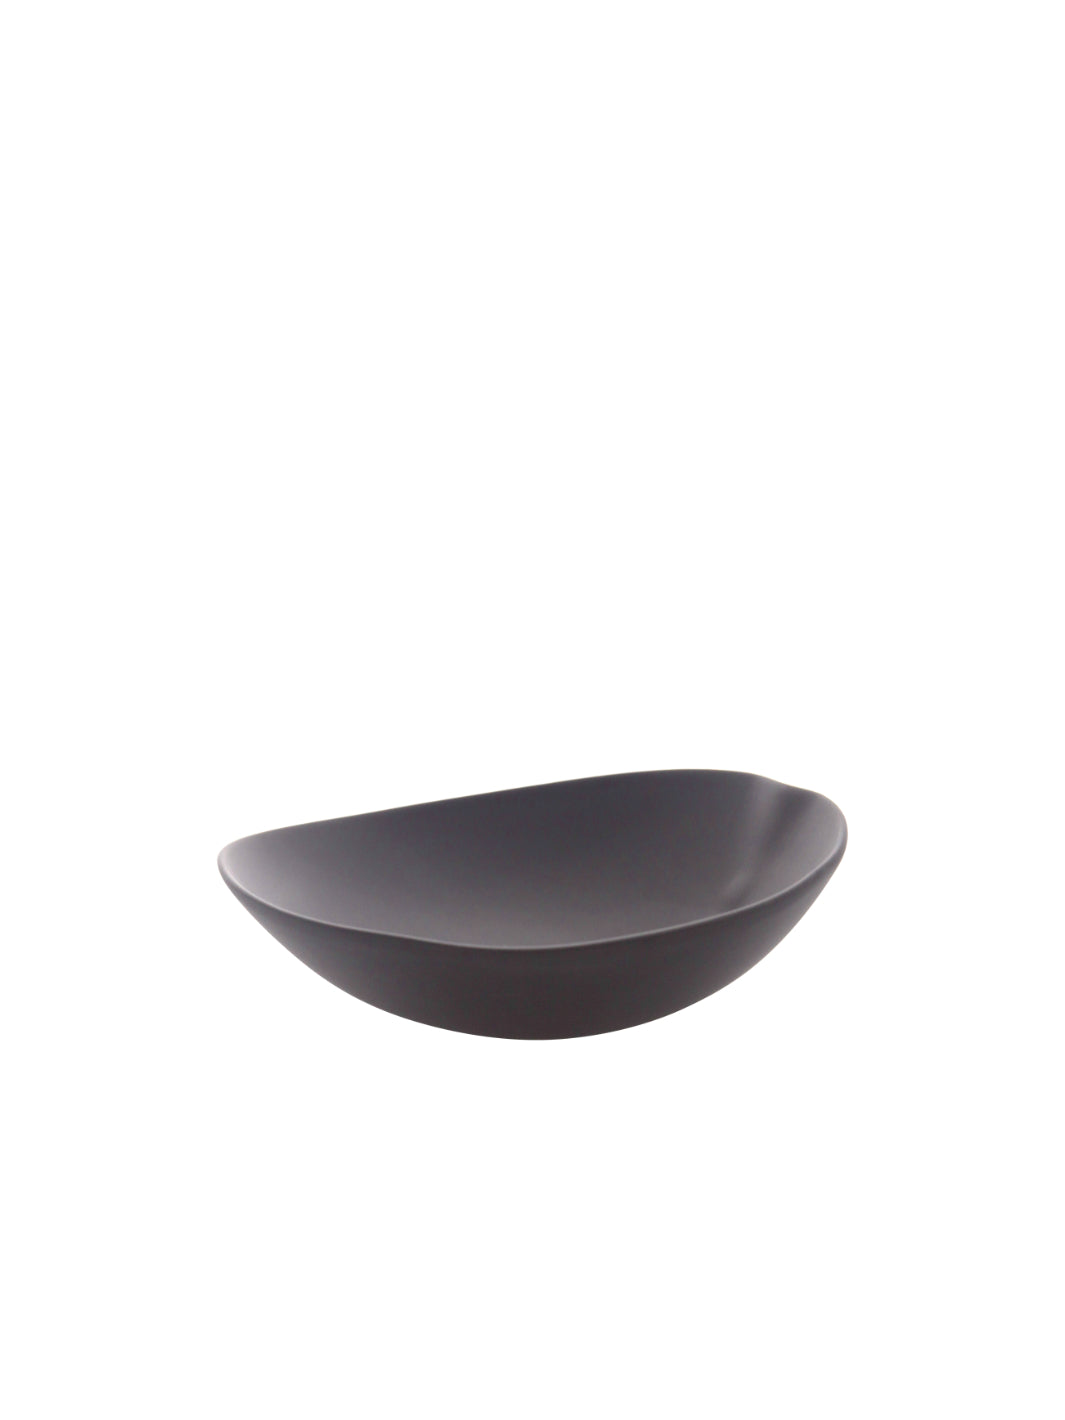 COOKPLAY Shell Salad Bowl (Matte Black) (22x21.5cm/8.7x8.5in) (Minor Aesthetic Defect)